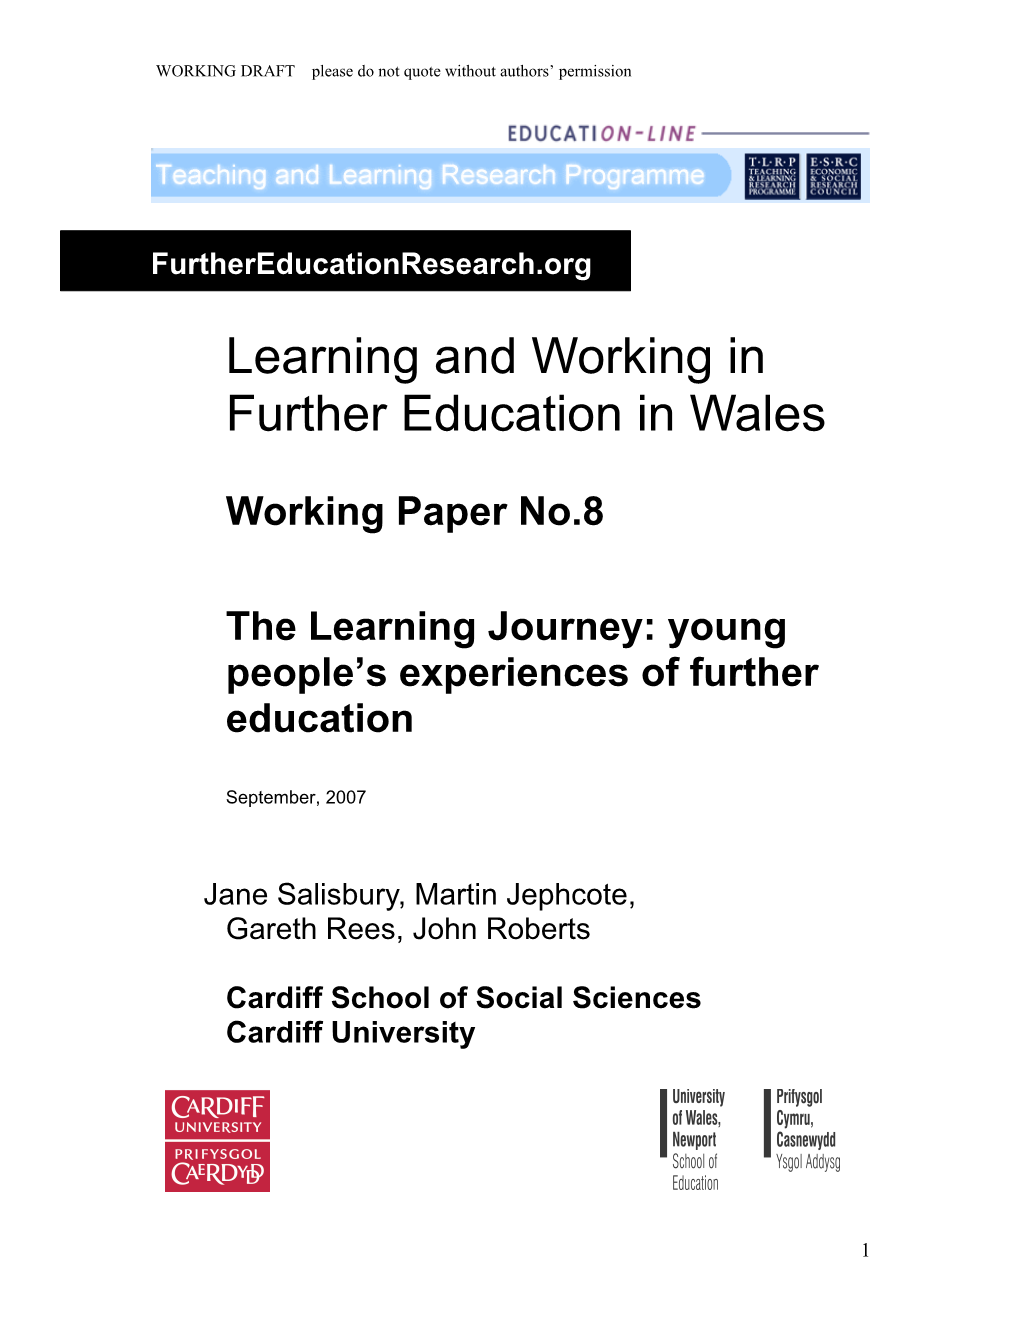 The Learning Journey: Young People S Experiences of Further Education